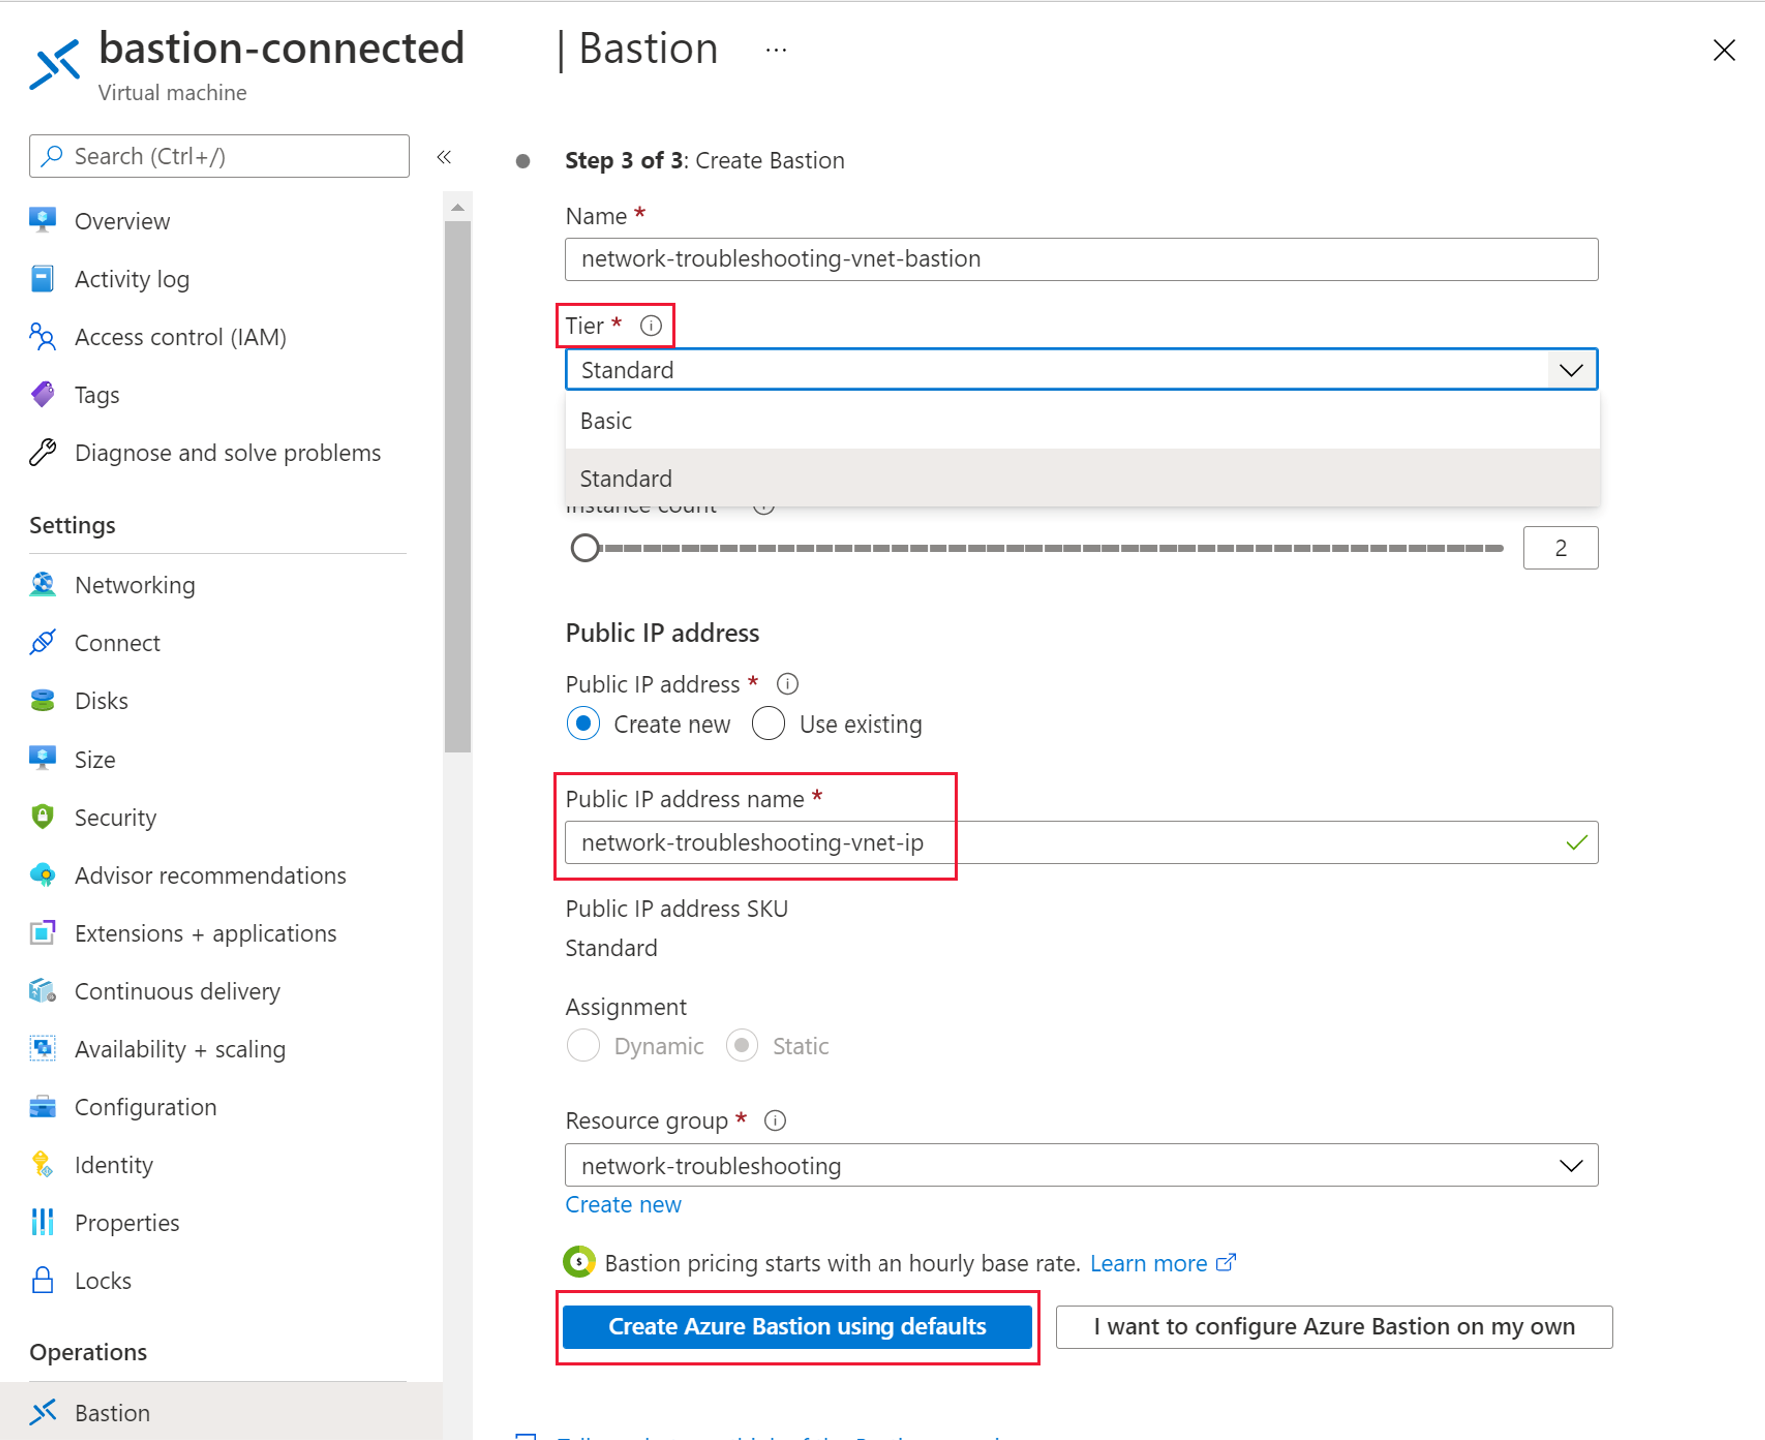 A screenshot of the Bastion creation wizard, showing how to select the Standard Tier, public IP address name, and the Create Azure Bastion using the defaults button.